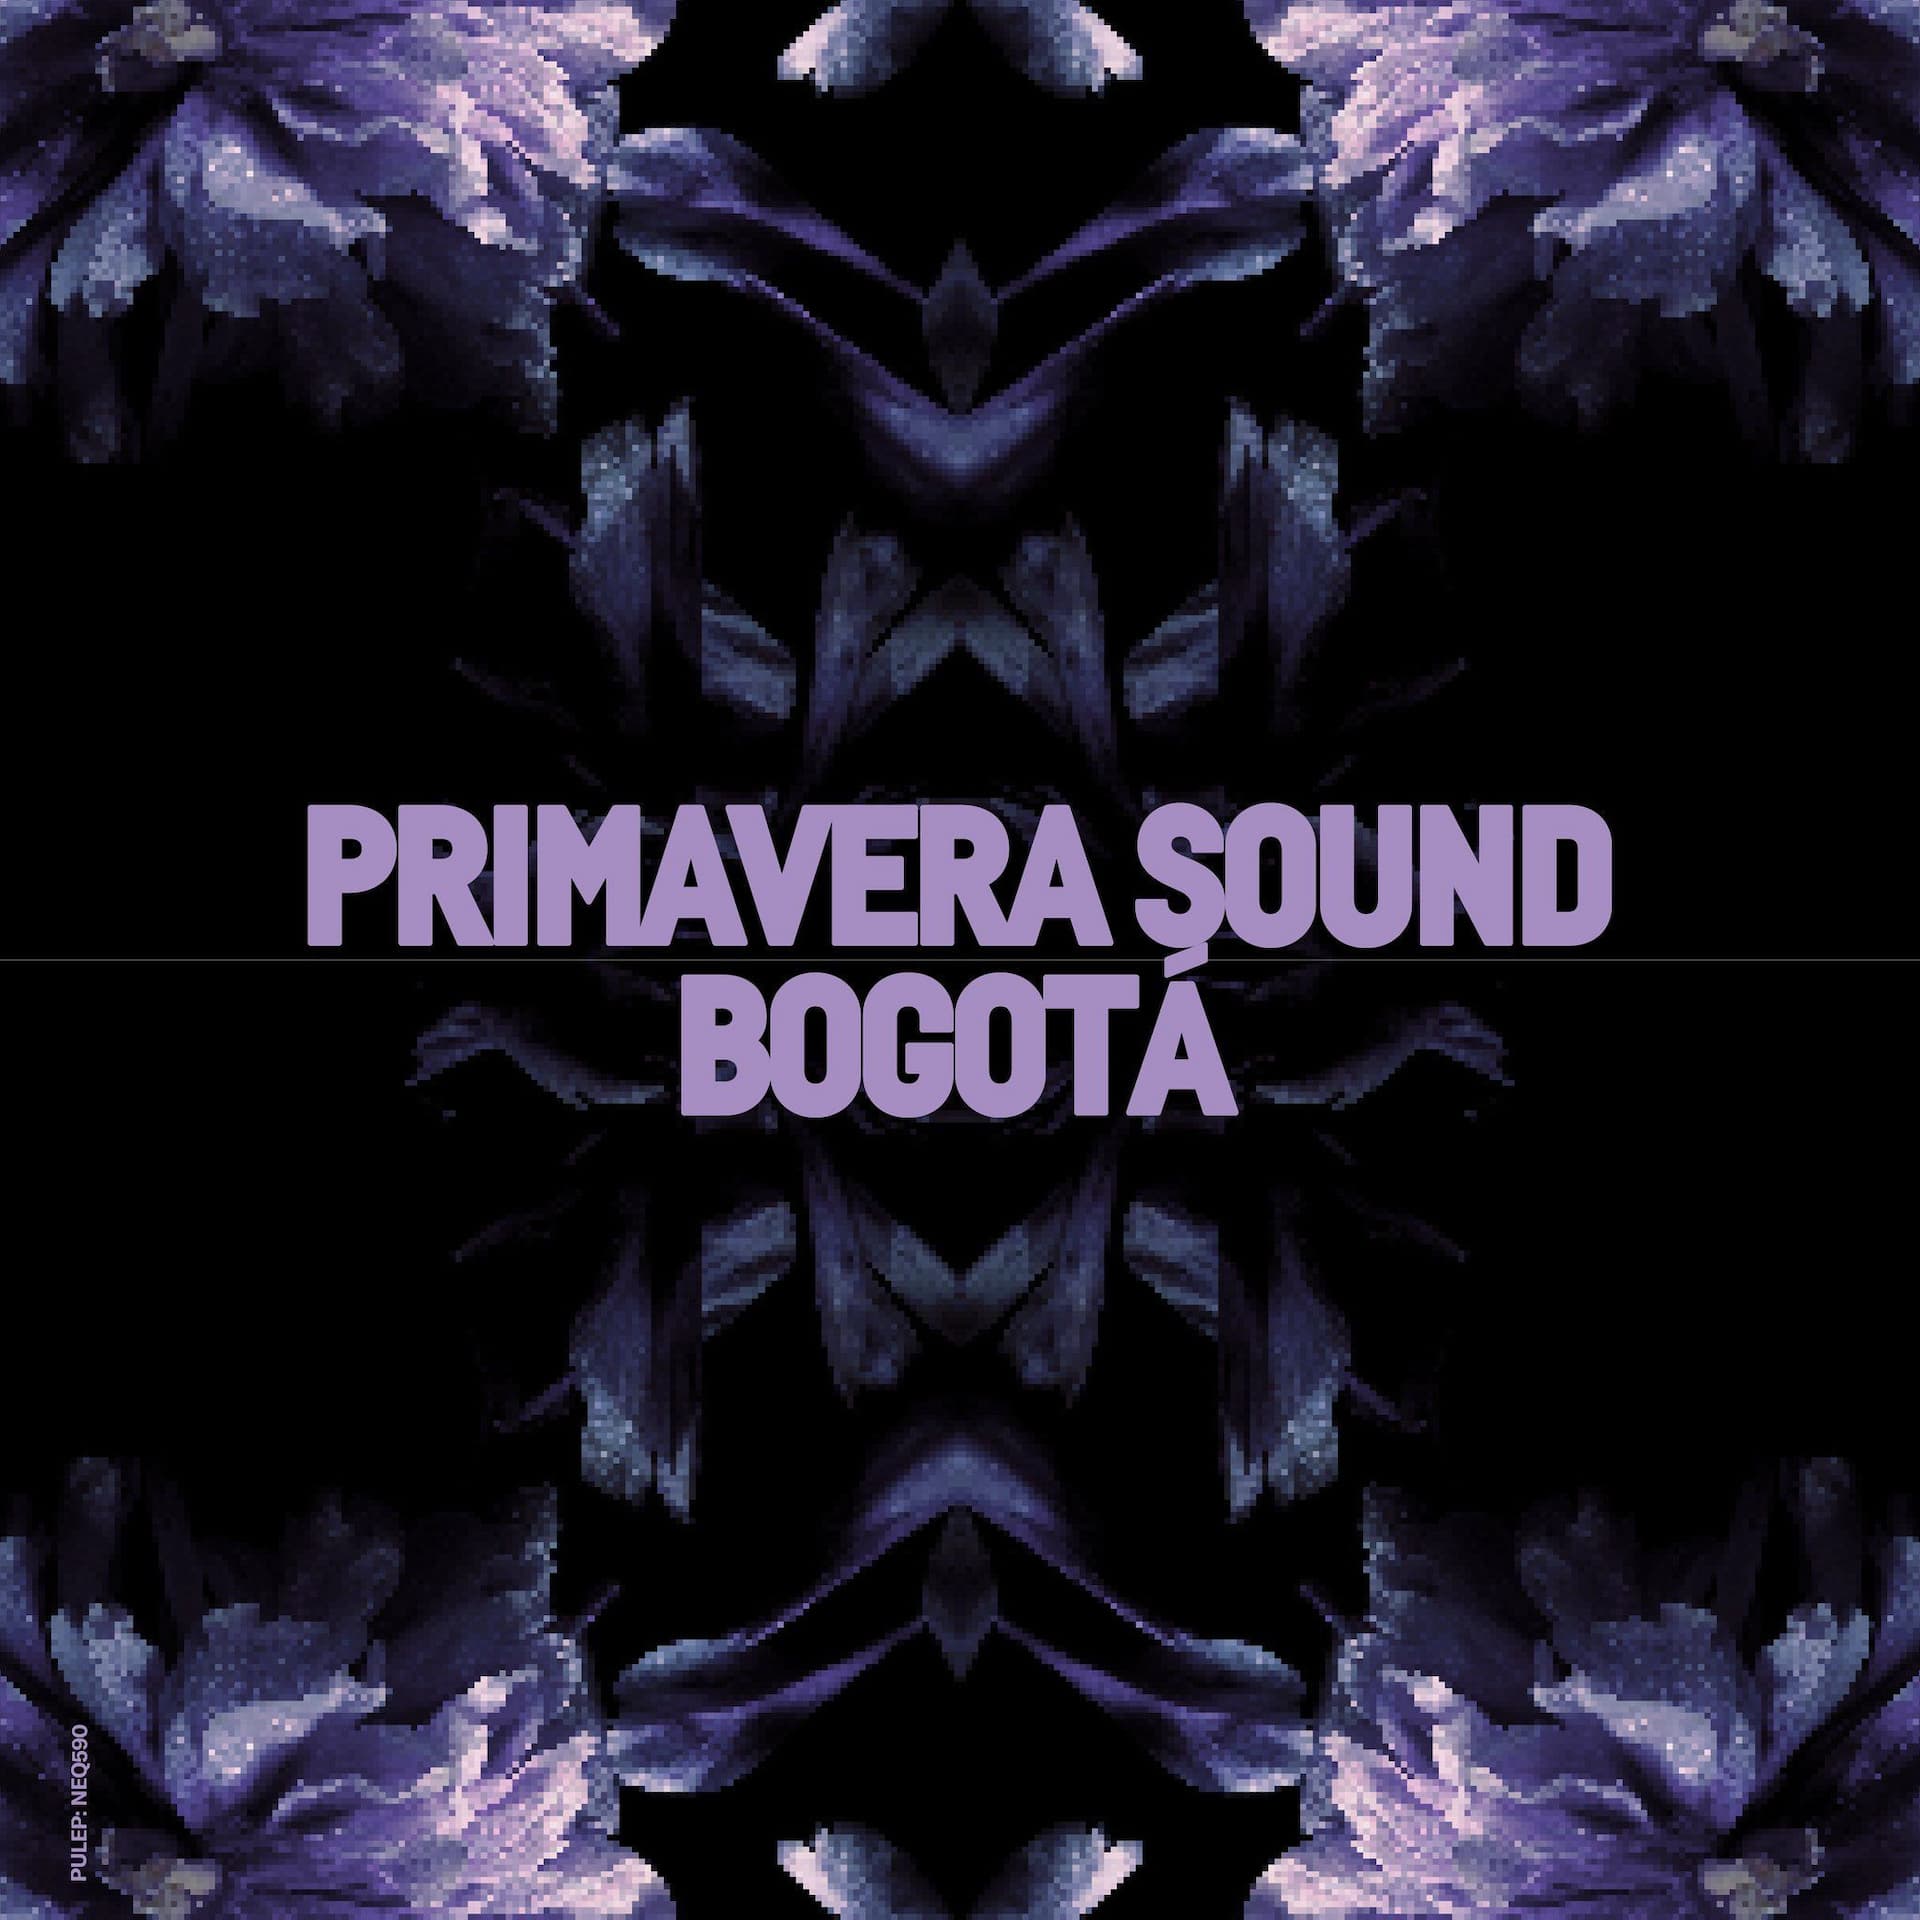 Primavera Sound Expands to Colombia with Inaugural Bogotá Festival